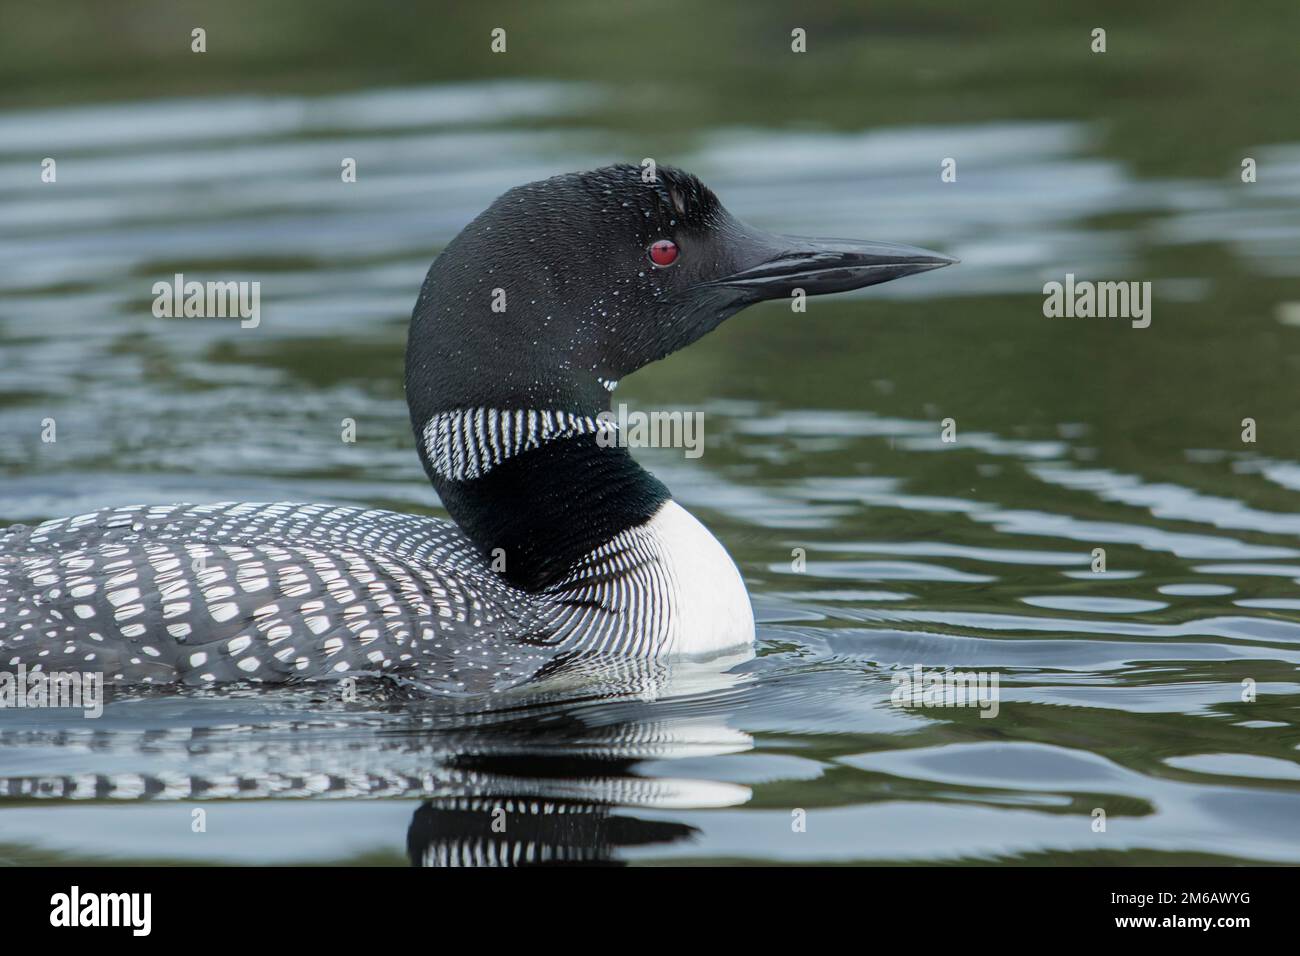 Adult common loon (Gavia immer) swimming on a lake. Stock Photo